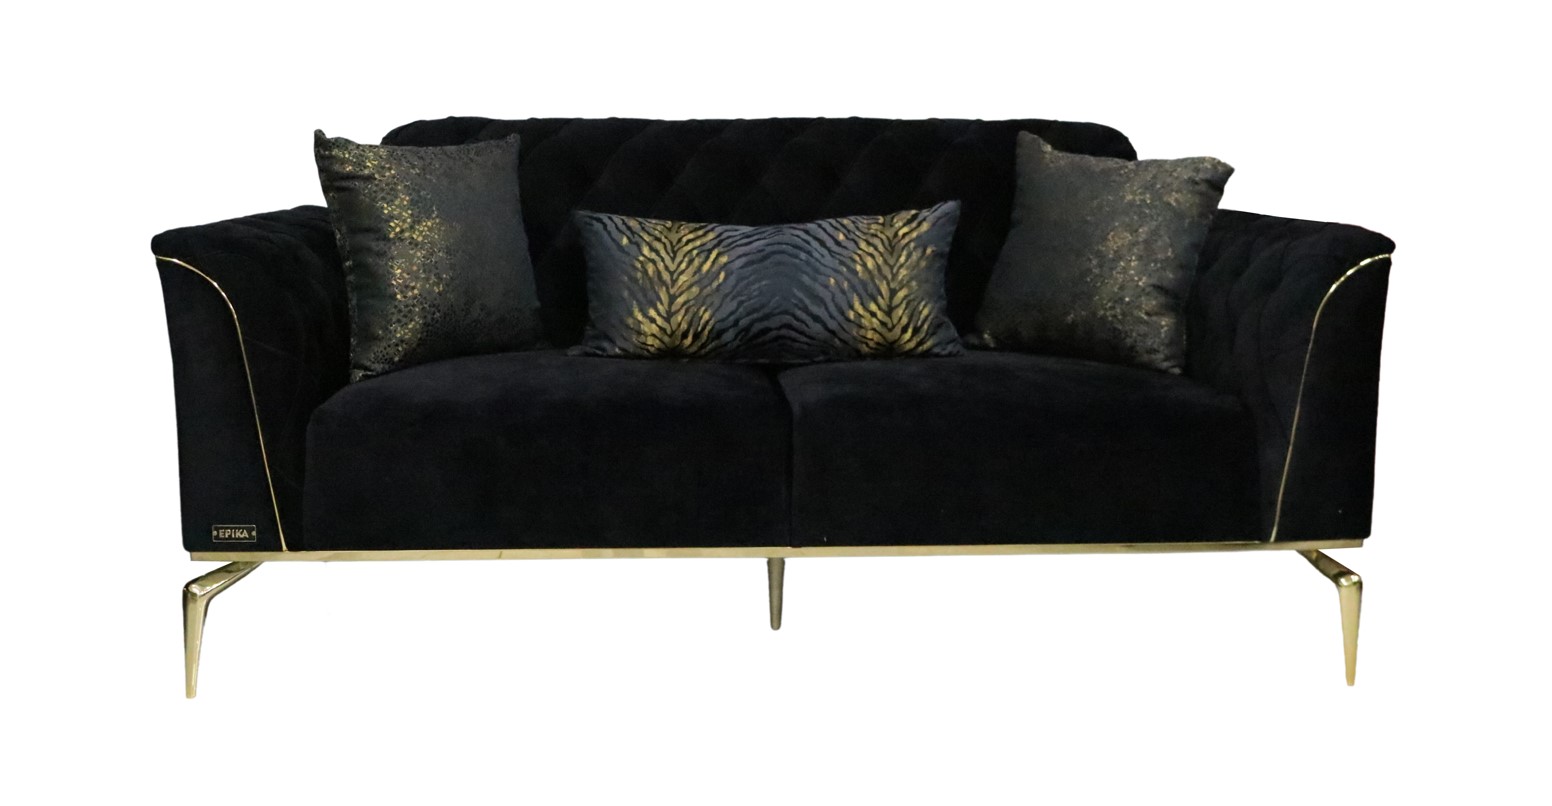 Looking for Affordable Sofas? Let's Find Your Dream Sofa  %Post Title